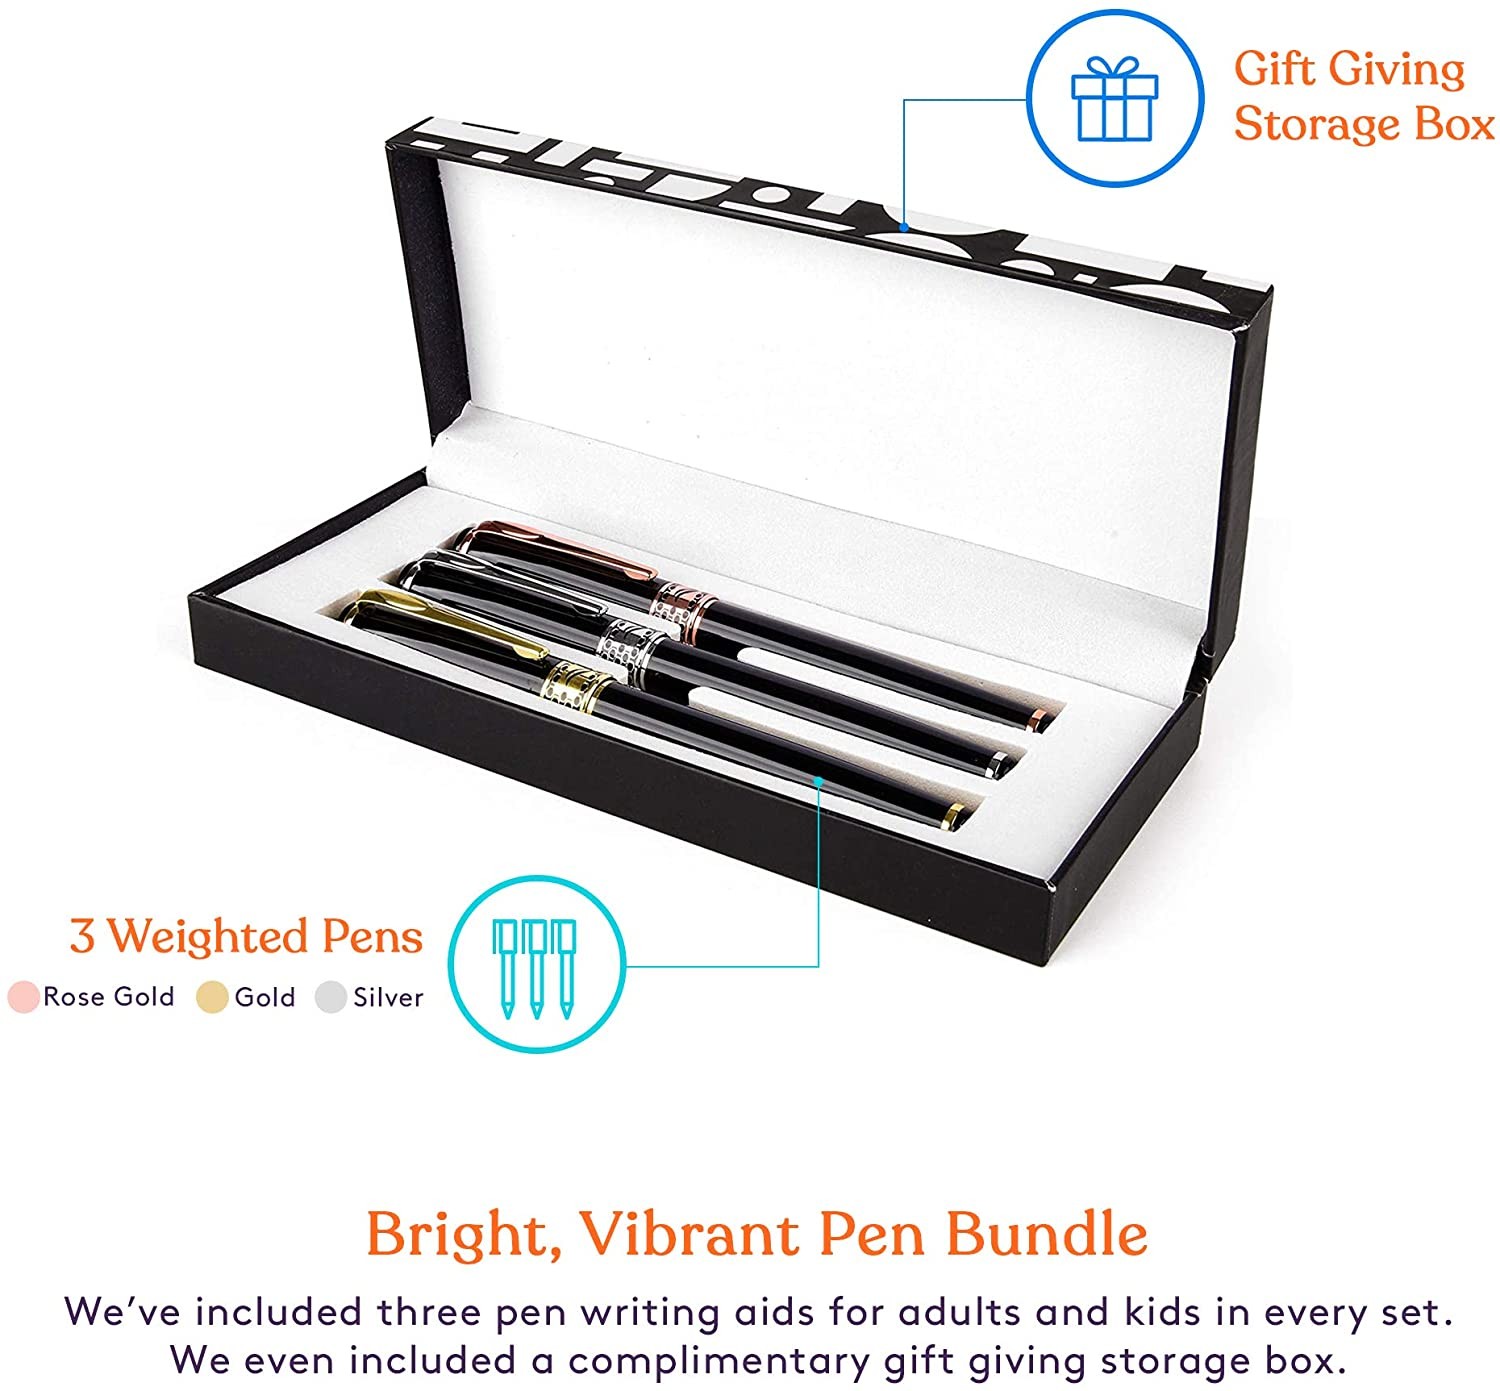  Big Weighted Fat Pens for Parkinsons Patients, Essential  Tremors, Arthritis Hand and Low Grip Strength - Heavy Weighted Pen to Help  Parkinson's, Carpal Tunnel, Elderly(1 Pack with 4 Extra Ink